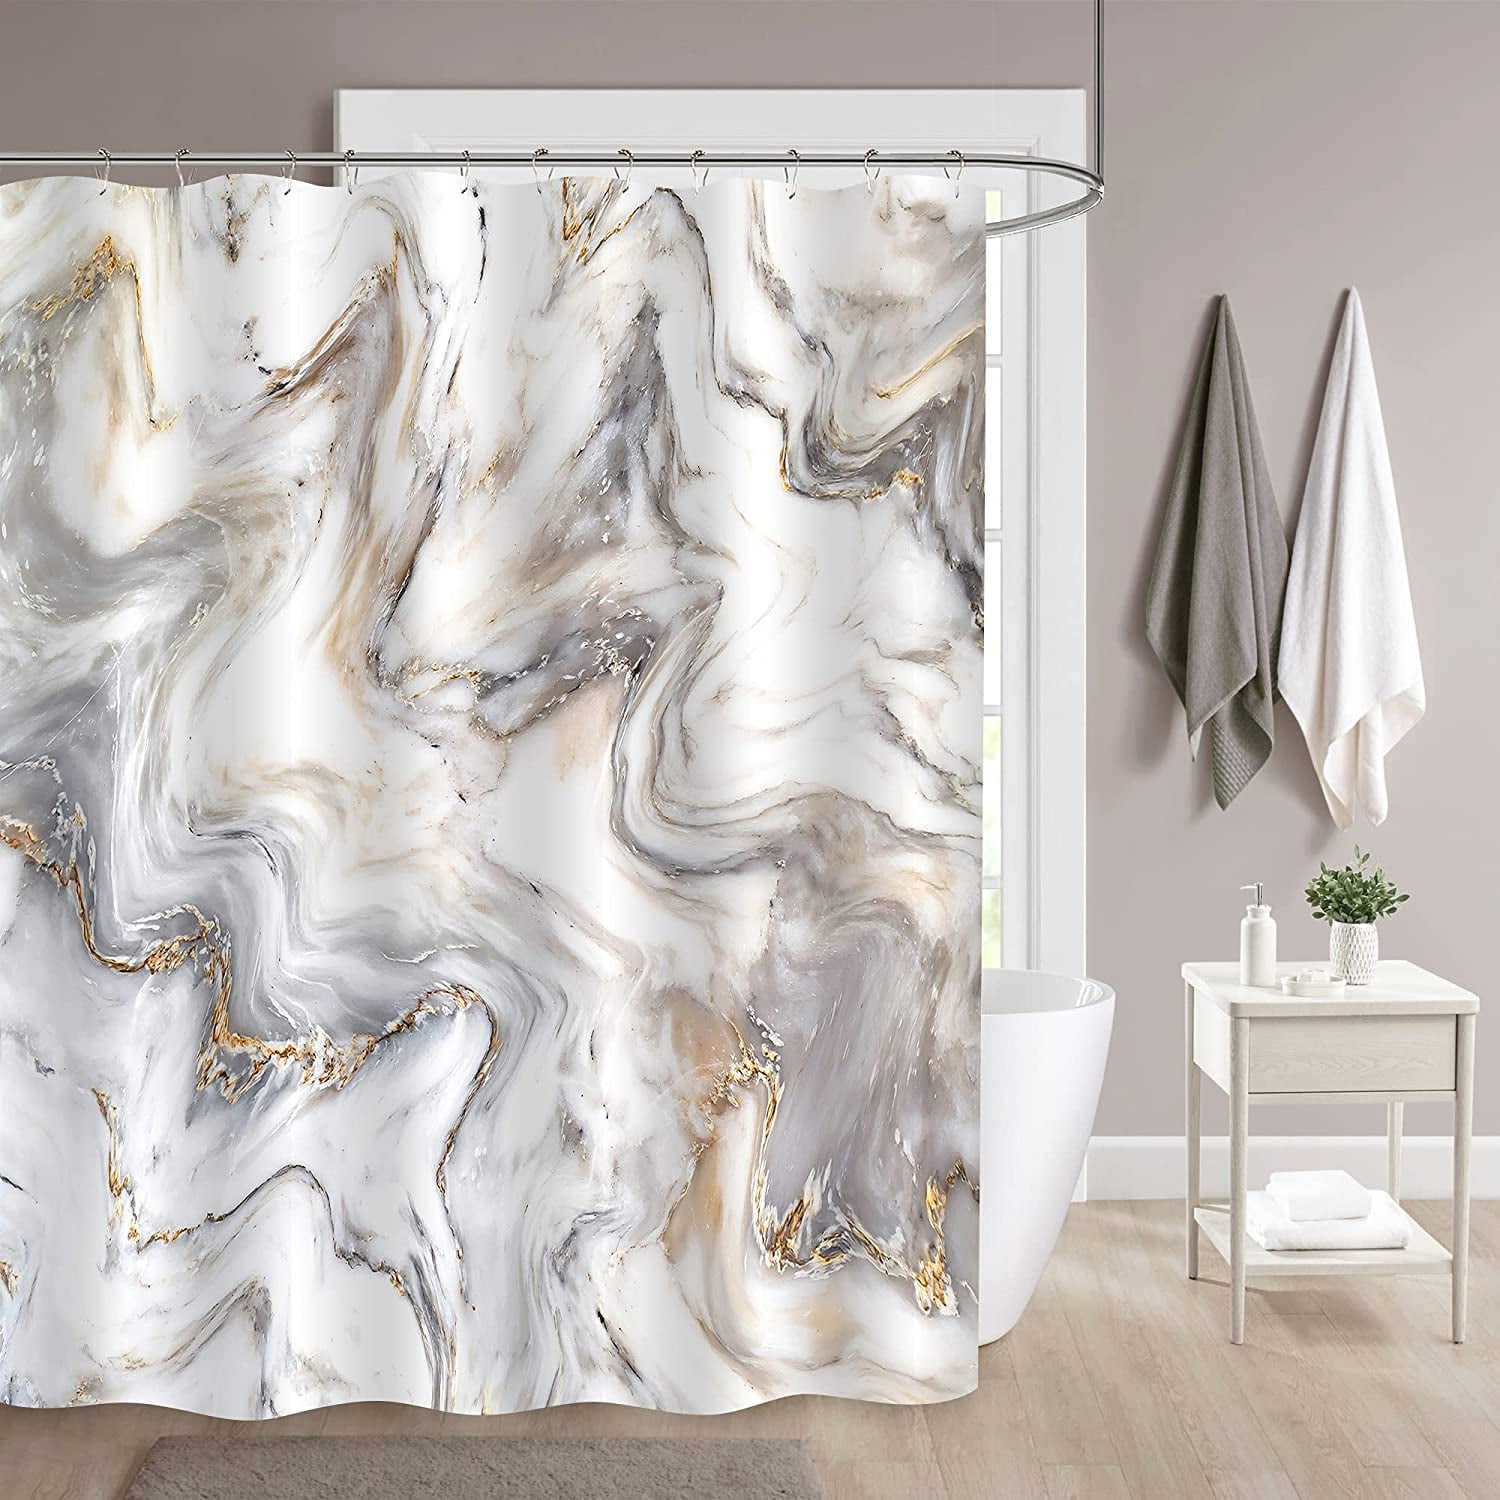 Clearance！EQWLJWE Vintage Grey Black Marble Shower Curtain 72Wx72H Inch  Abstract Fabric Ombre Shower Curtain Set Modern Geometric Bath Accessories  for